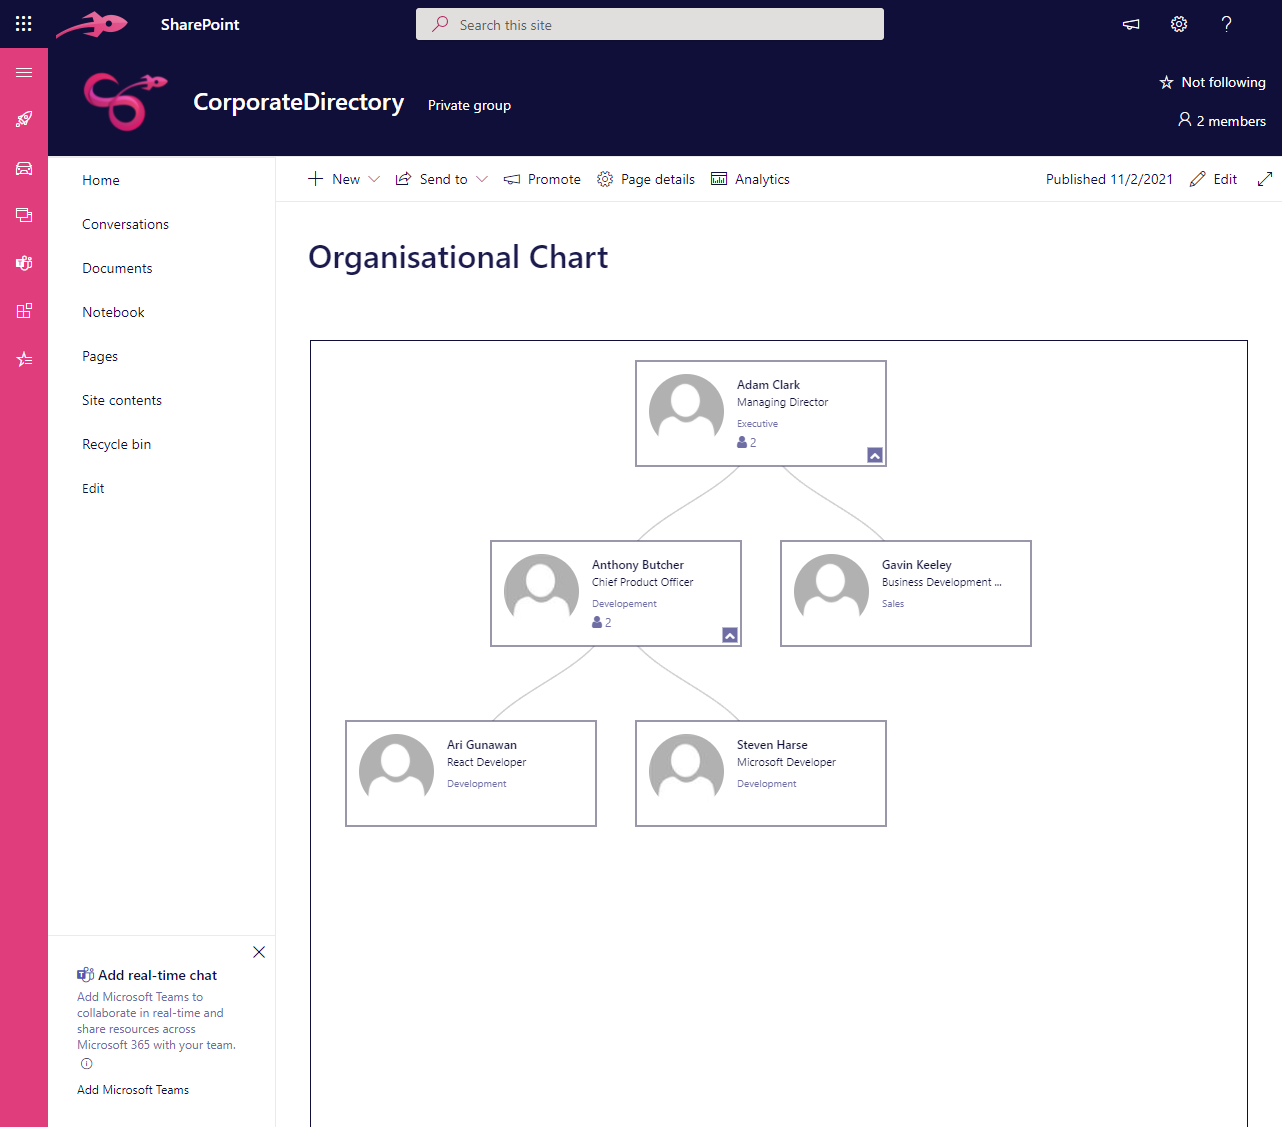 Org Chart view